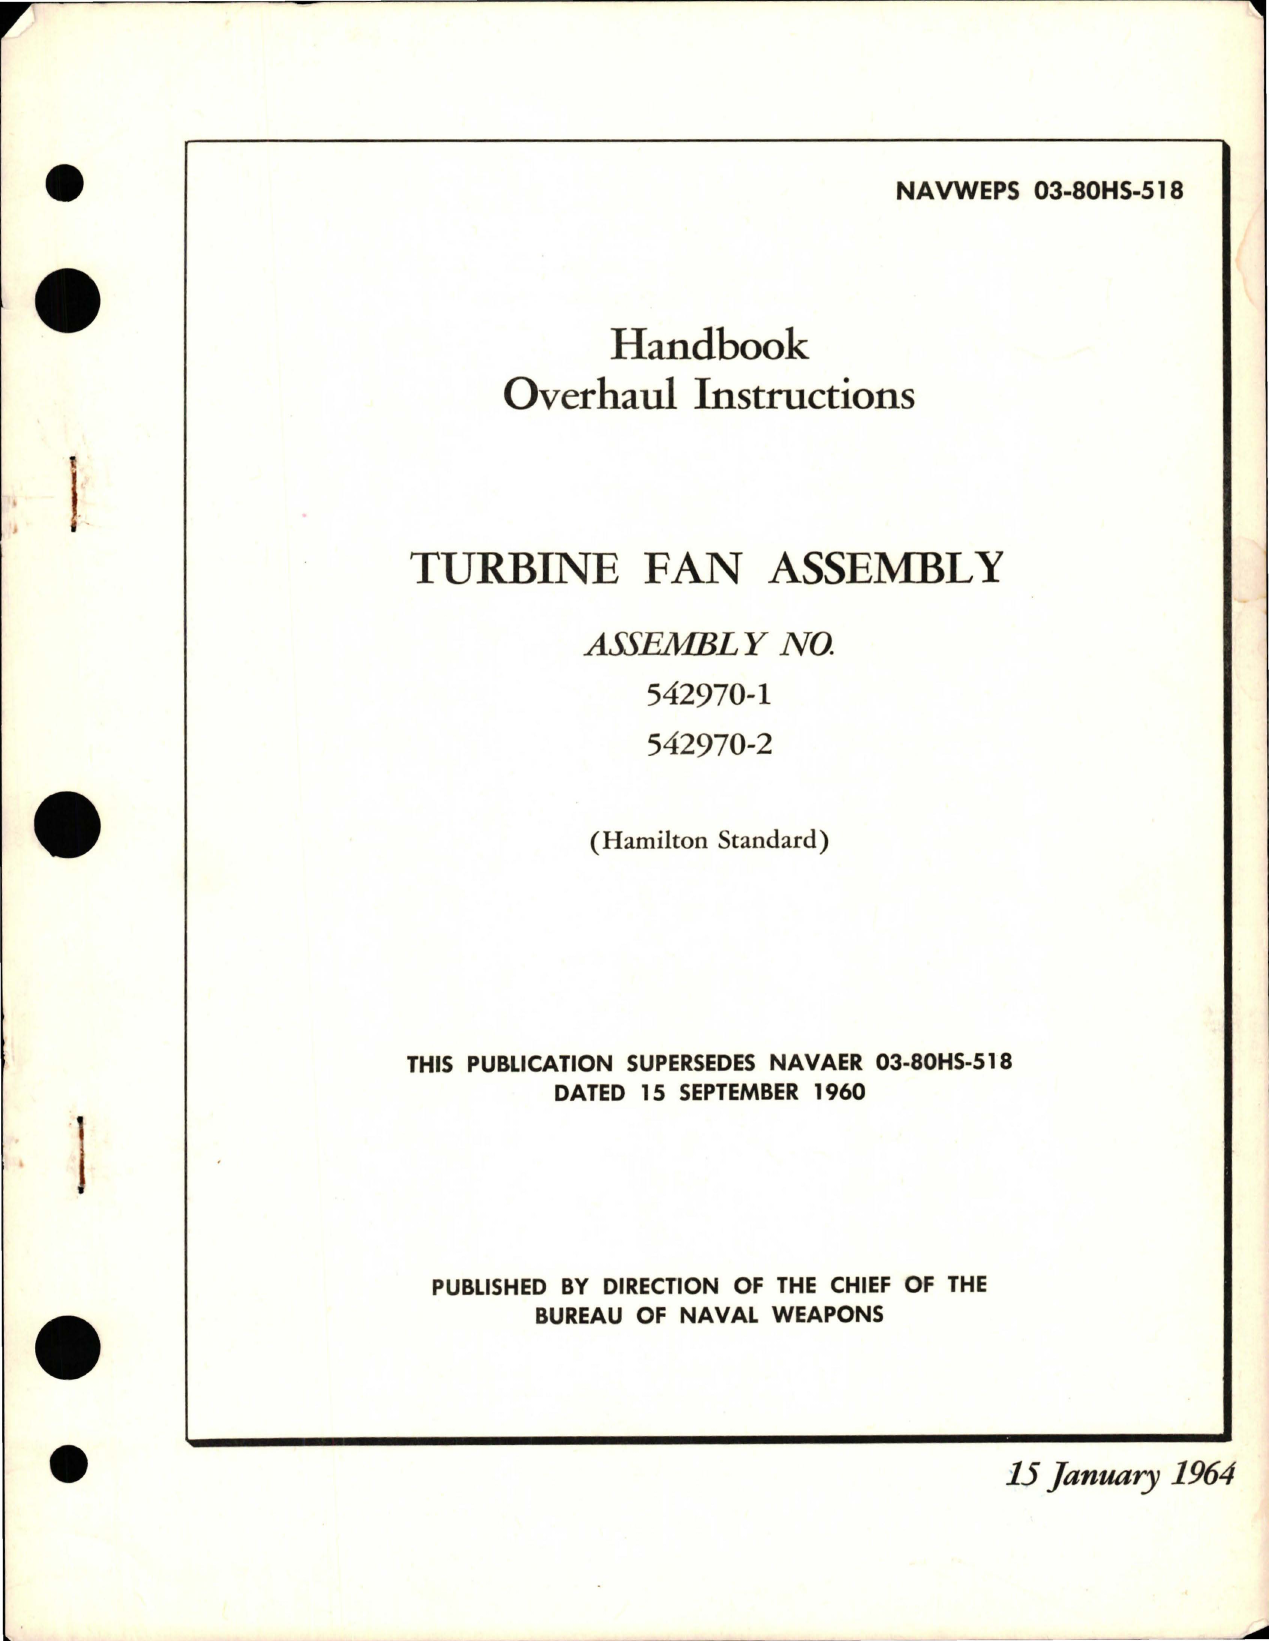 Sample page 1 from AirCorps Library document: Overhaul Instructions for Turbine Fan Assembly - 542970-1 and 542970-2